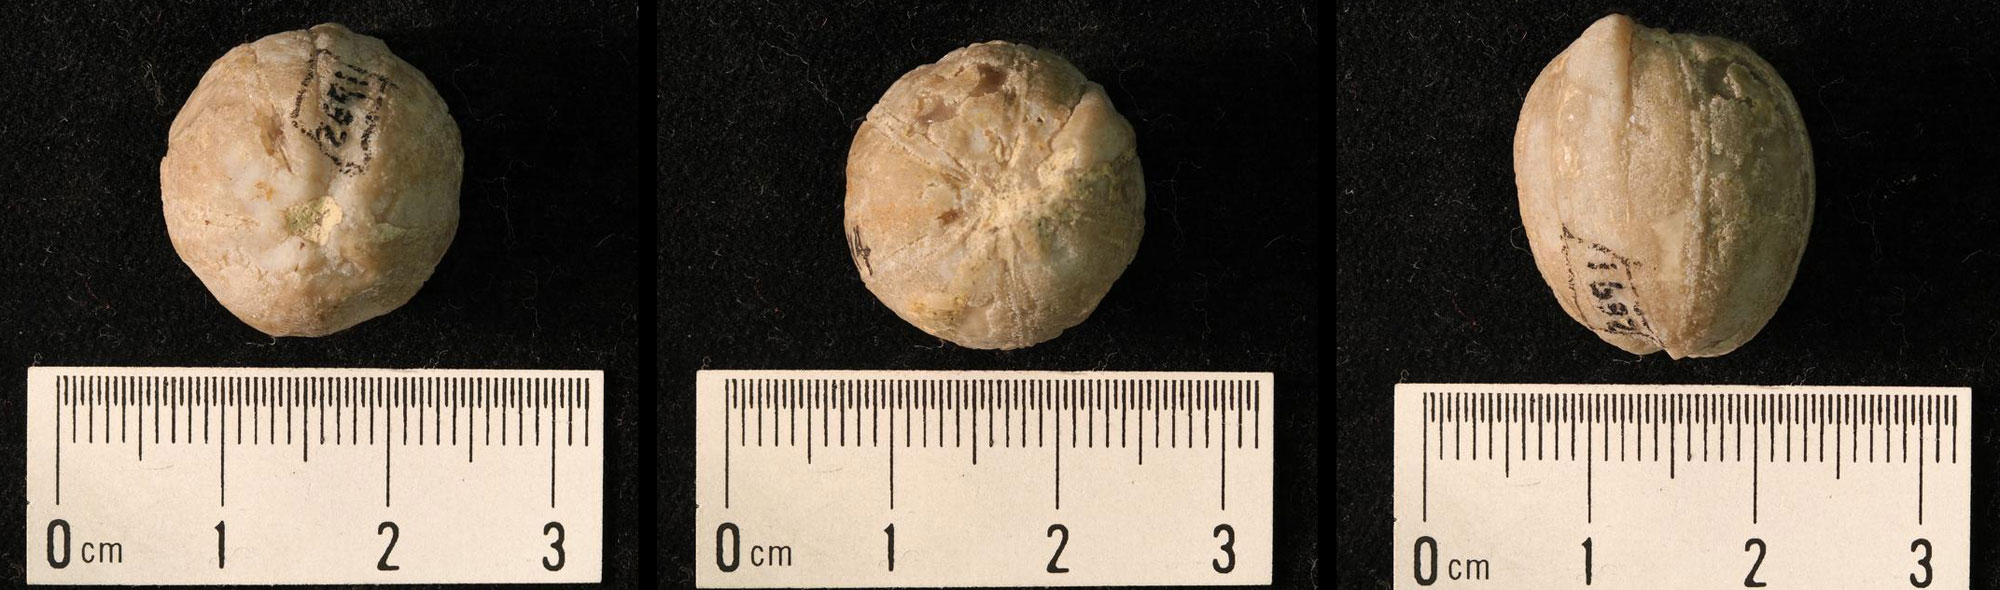 Photos of the calyx of a blastoid from the Devonian of Kentucky in three views. The fossil is shown from both ends and from the side.